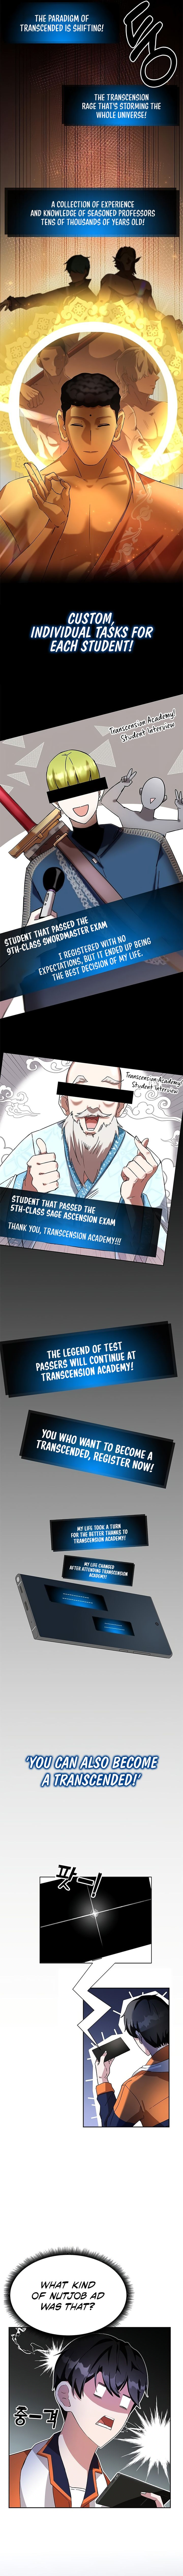 Transcension Academy Chapter 1 Page 4